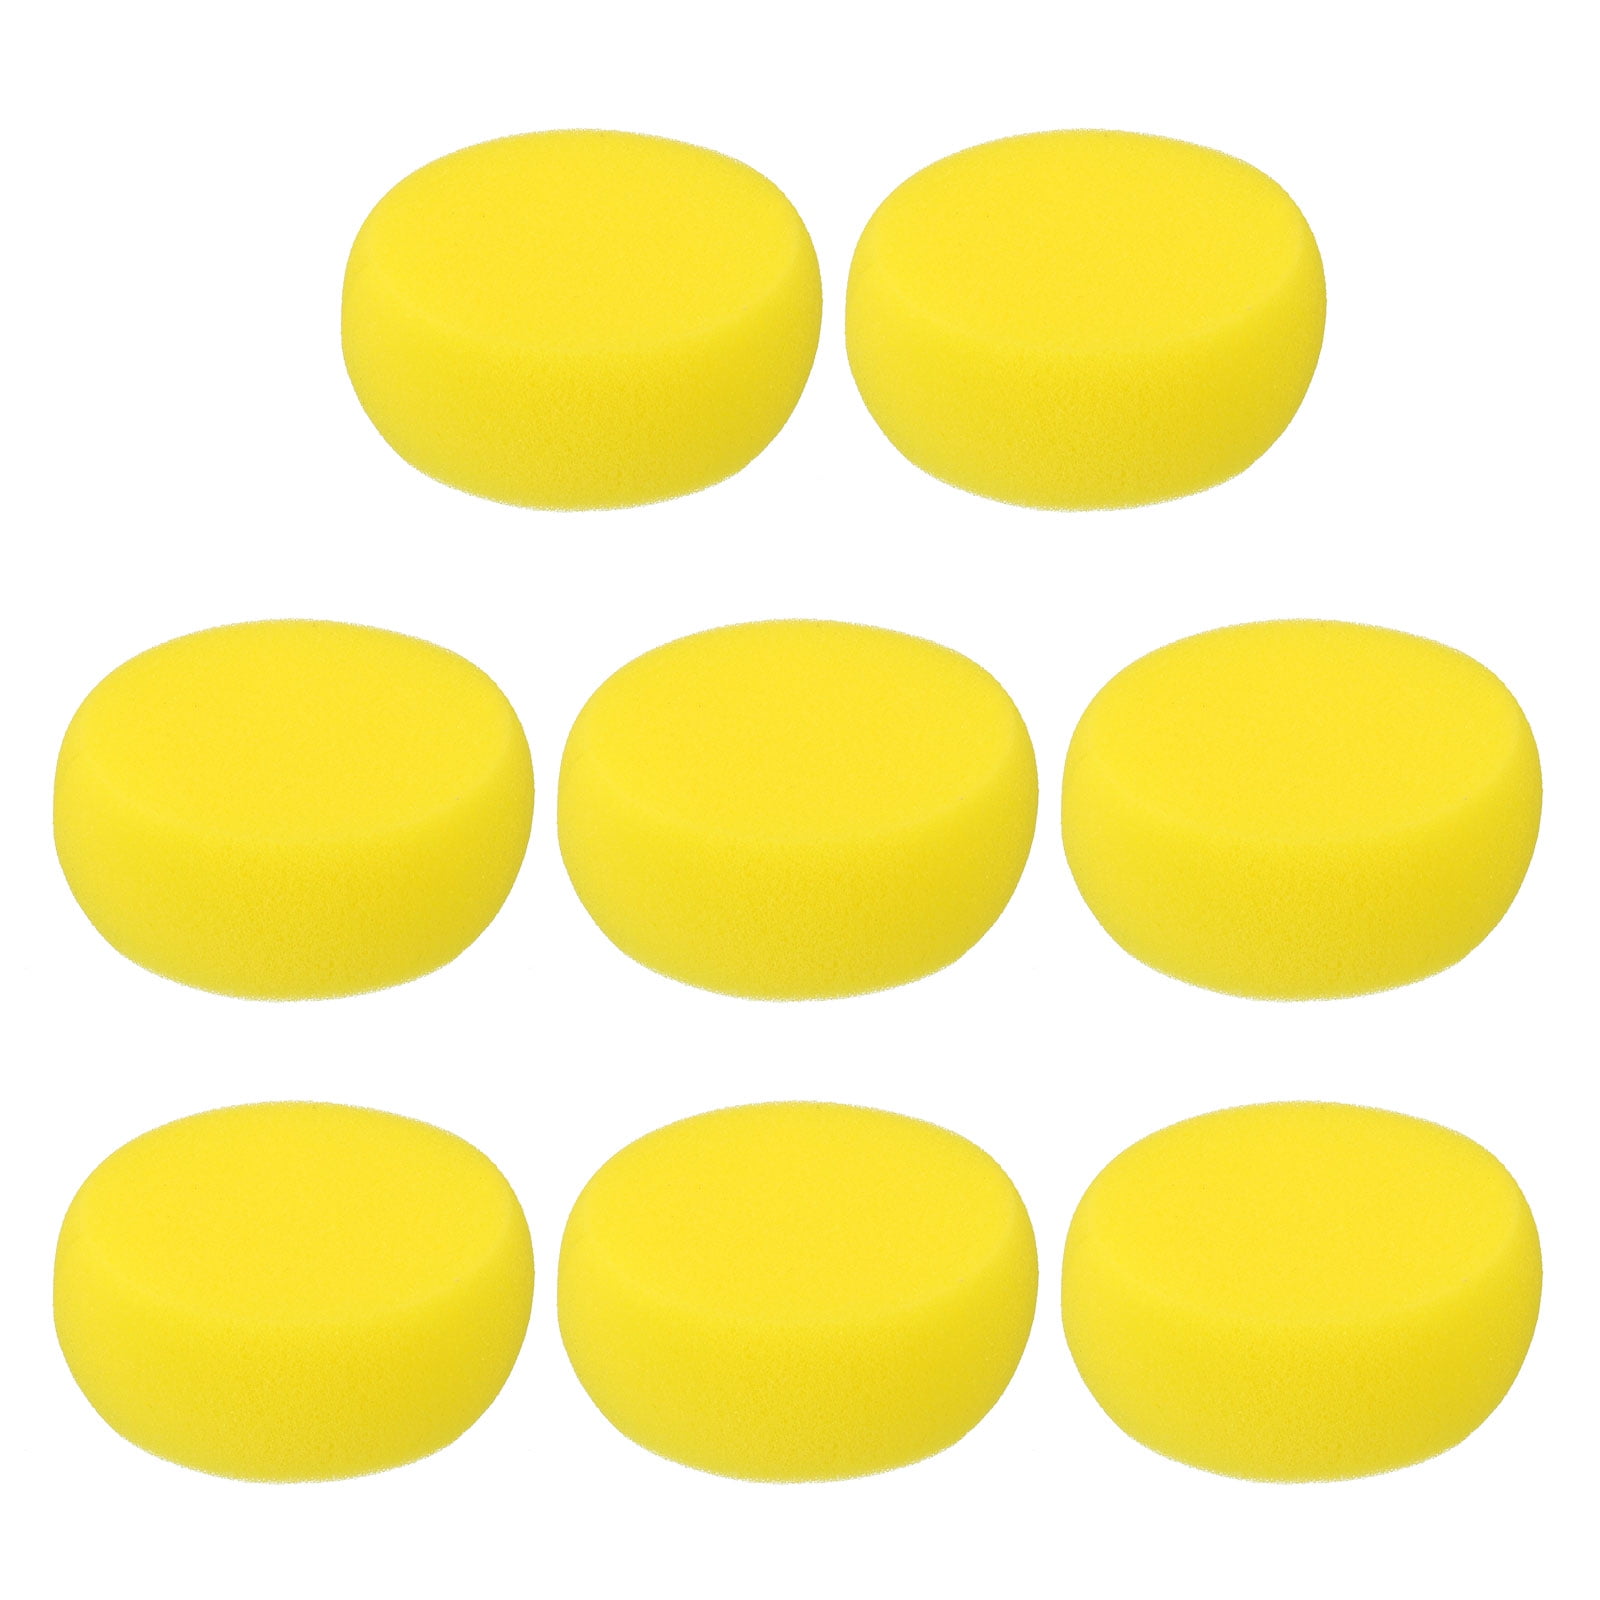 12 Pcs Yellow Round Painting Sponges Applicator Watercolor Synthetic  Sponges Artist Sponges for Painting, Ceramics, Pottery, Watercolor,  Household Use